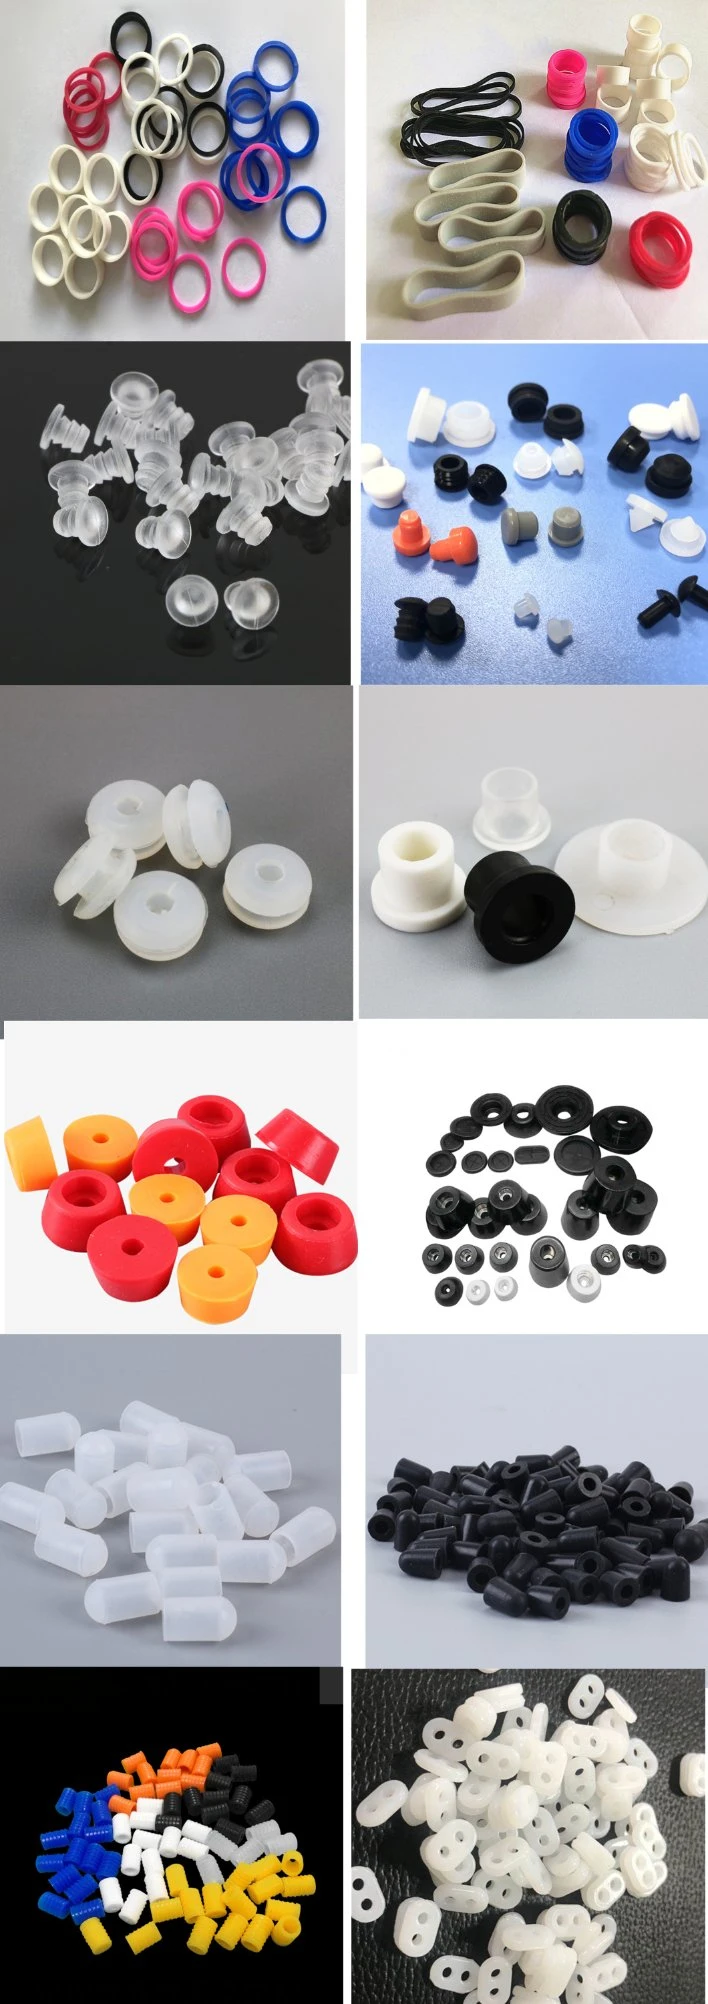 High Temperature Resistant Silicone Rubber Gasket for Oven Door